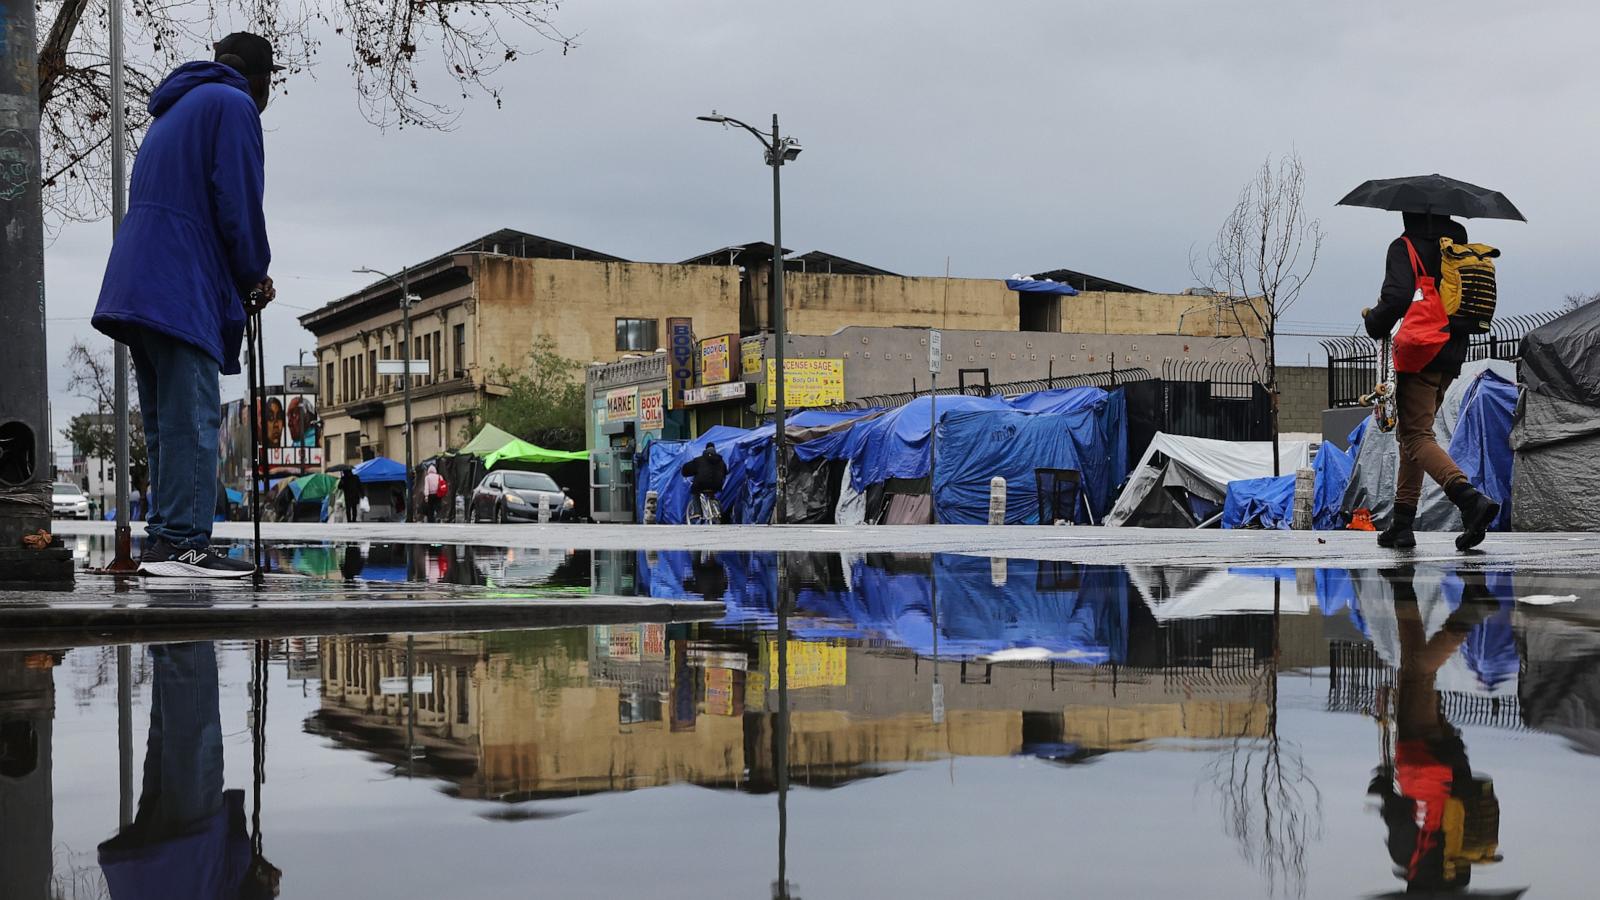 homelessness encampments in this state would be banned under new bill